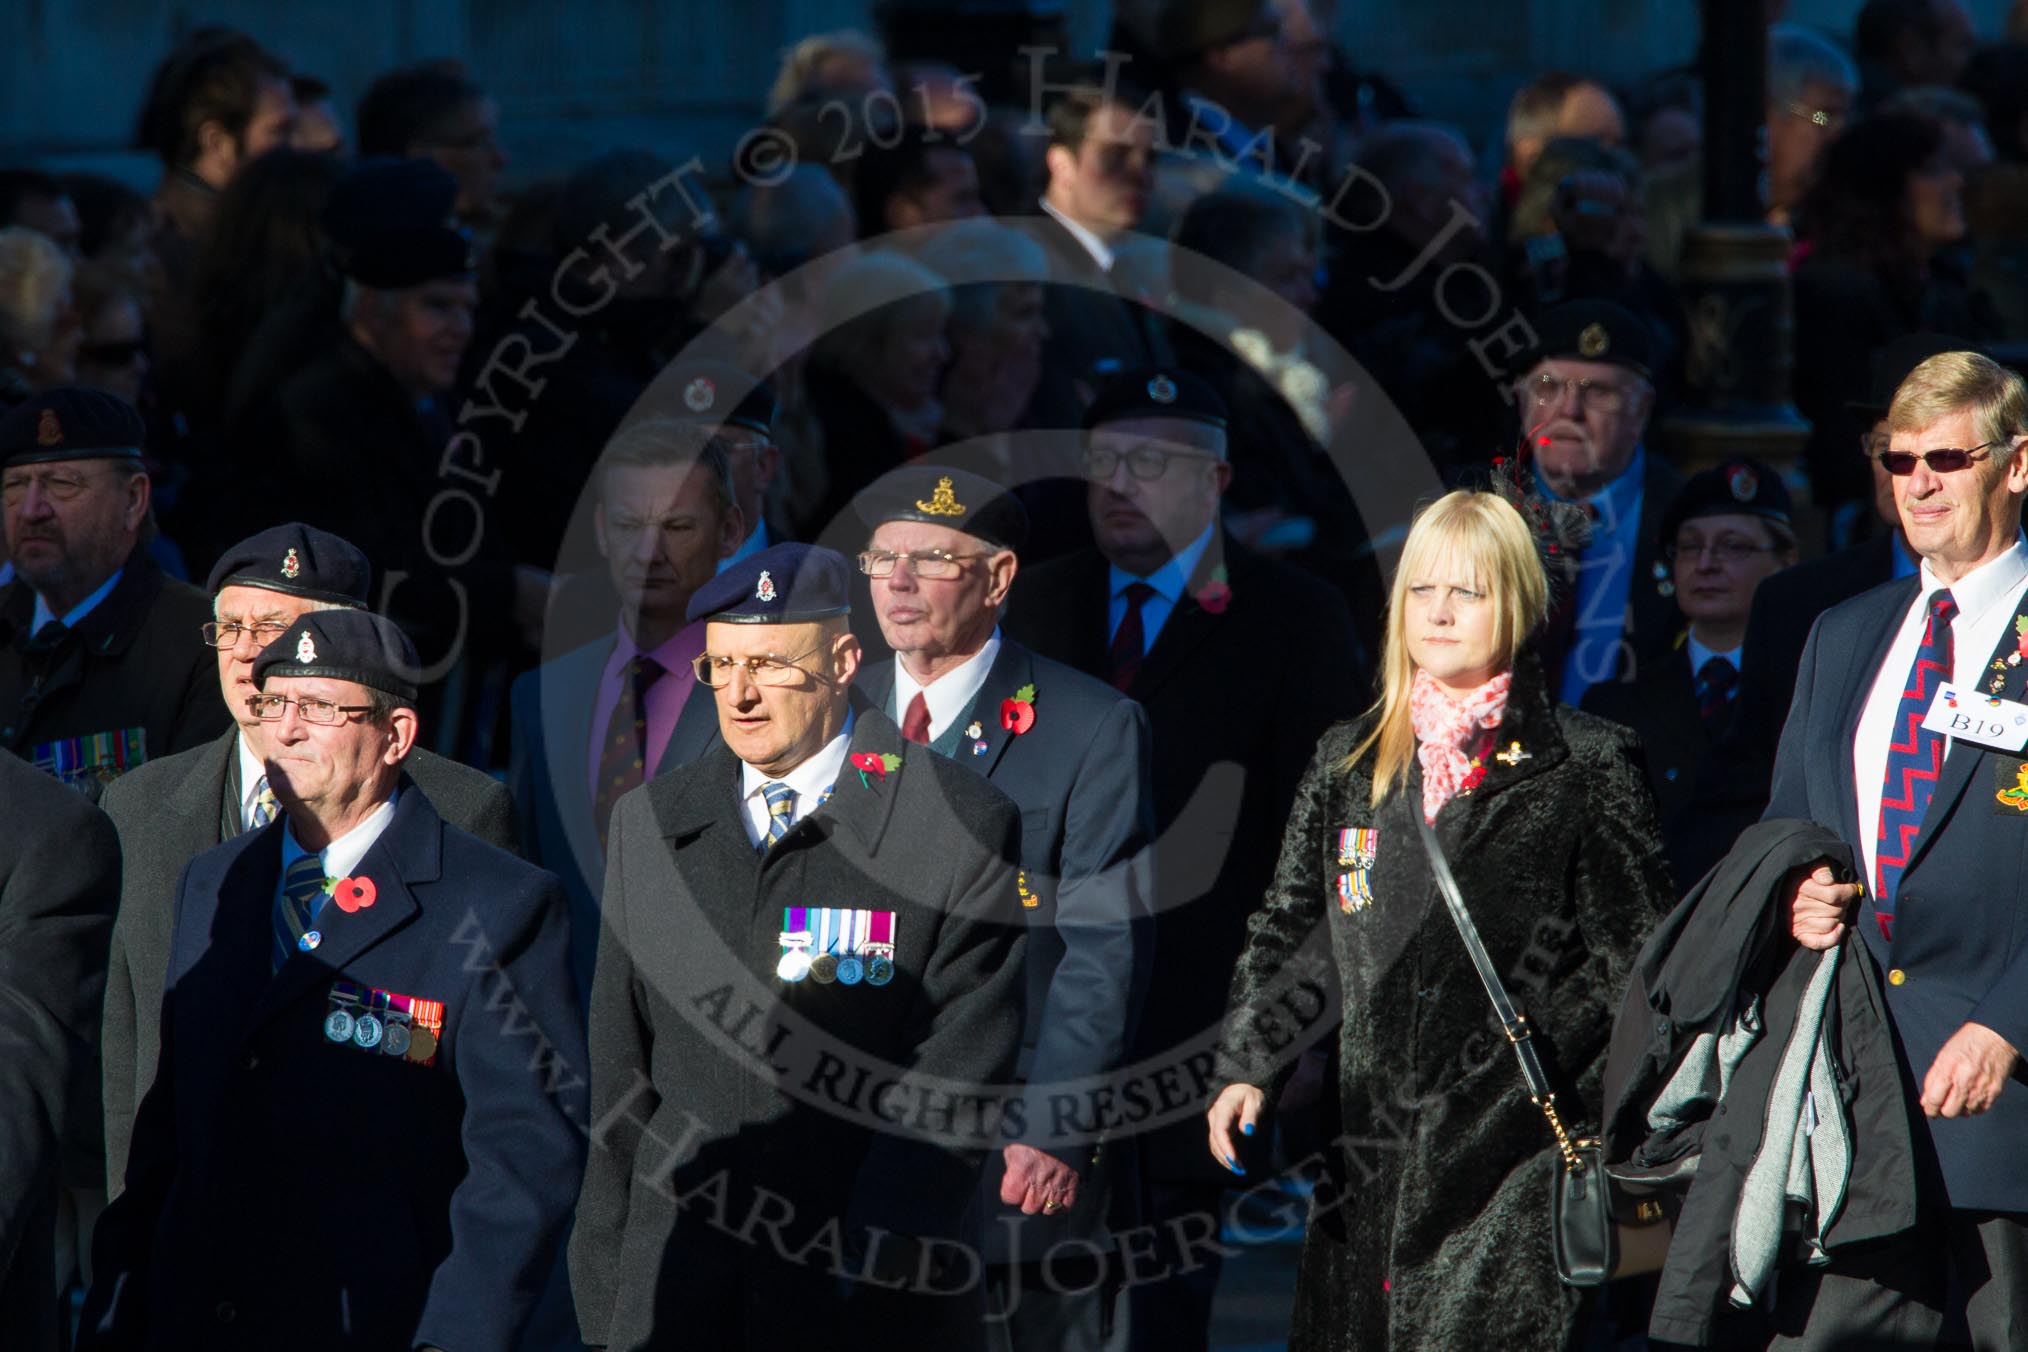 Remembrance Sunday Cenotaph March Past 2013: B18 - 3rd Regiment Royal Horse Artillery Association..
Press stand opposite the Foreign Office building, Whitehall, London SW1,
London,
Greater London,
United Kingdom,
on 10 November 2013 at 12:01, image #1448